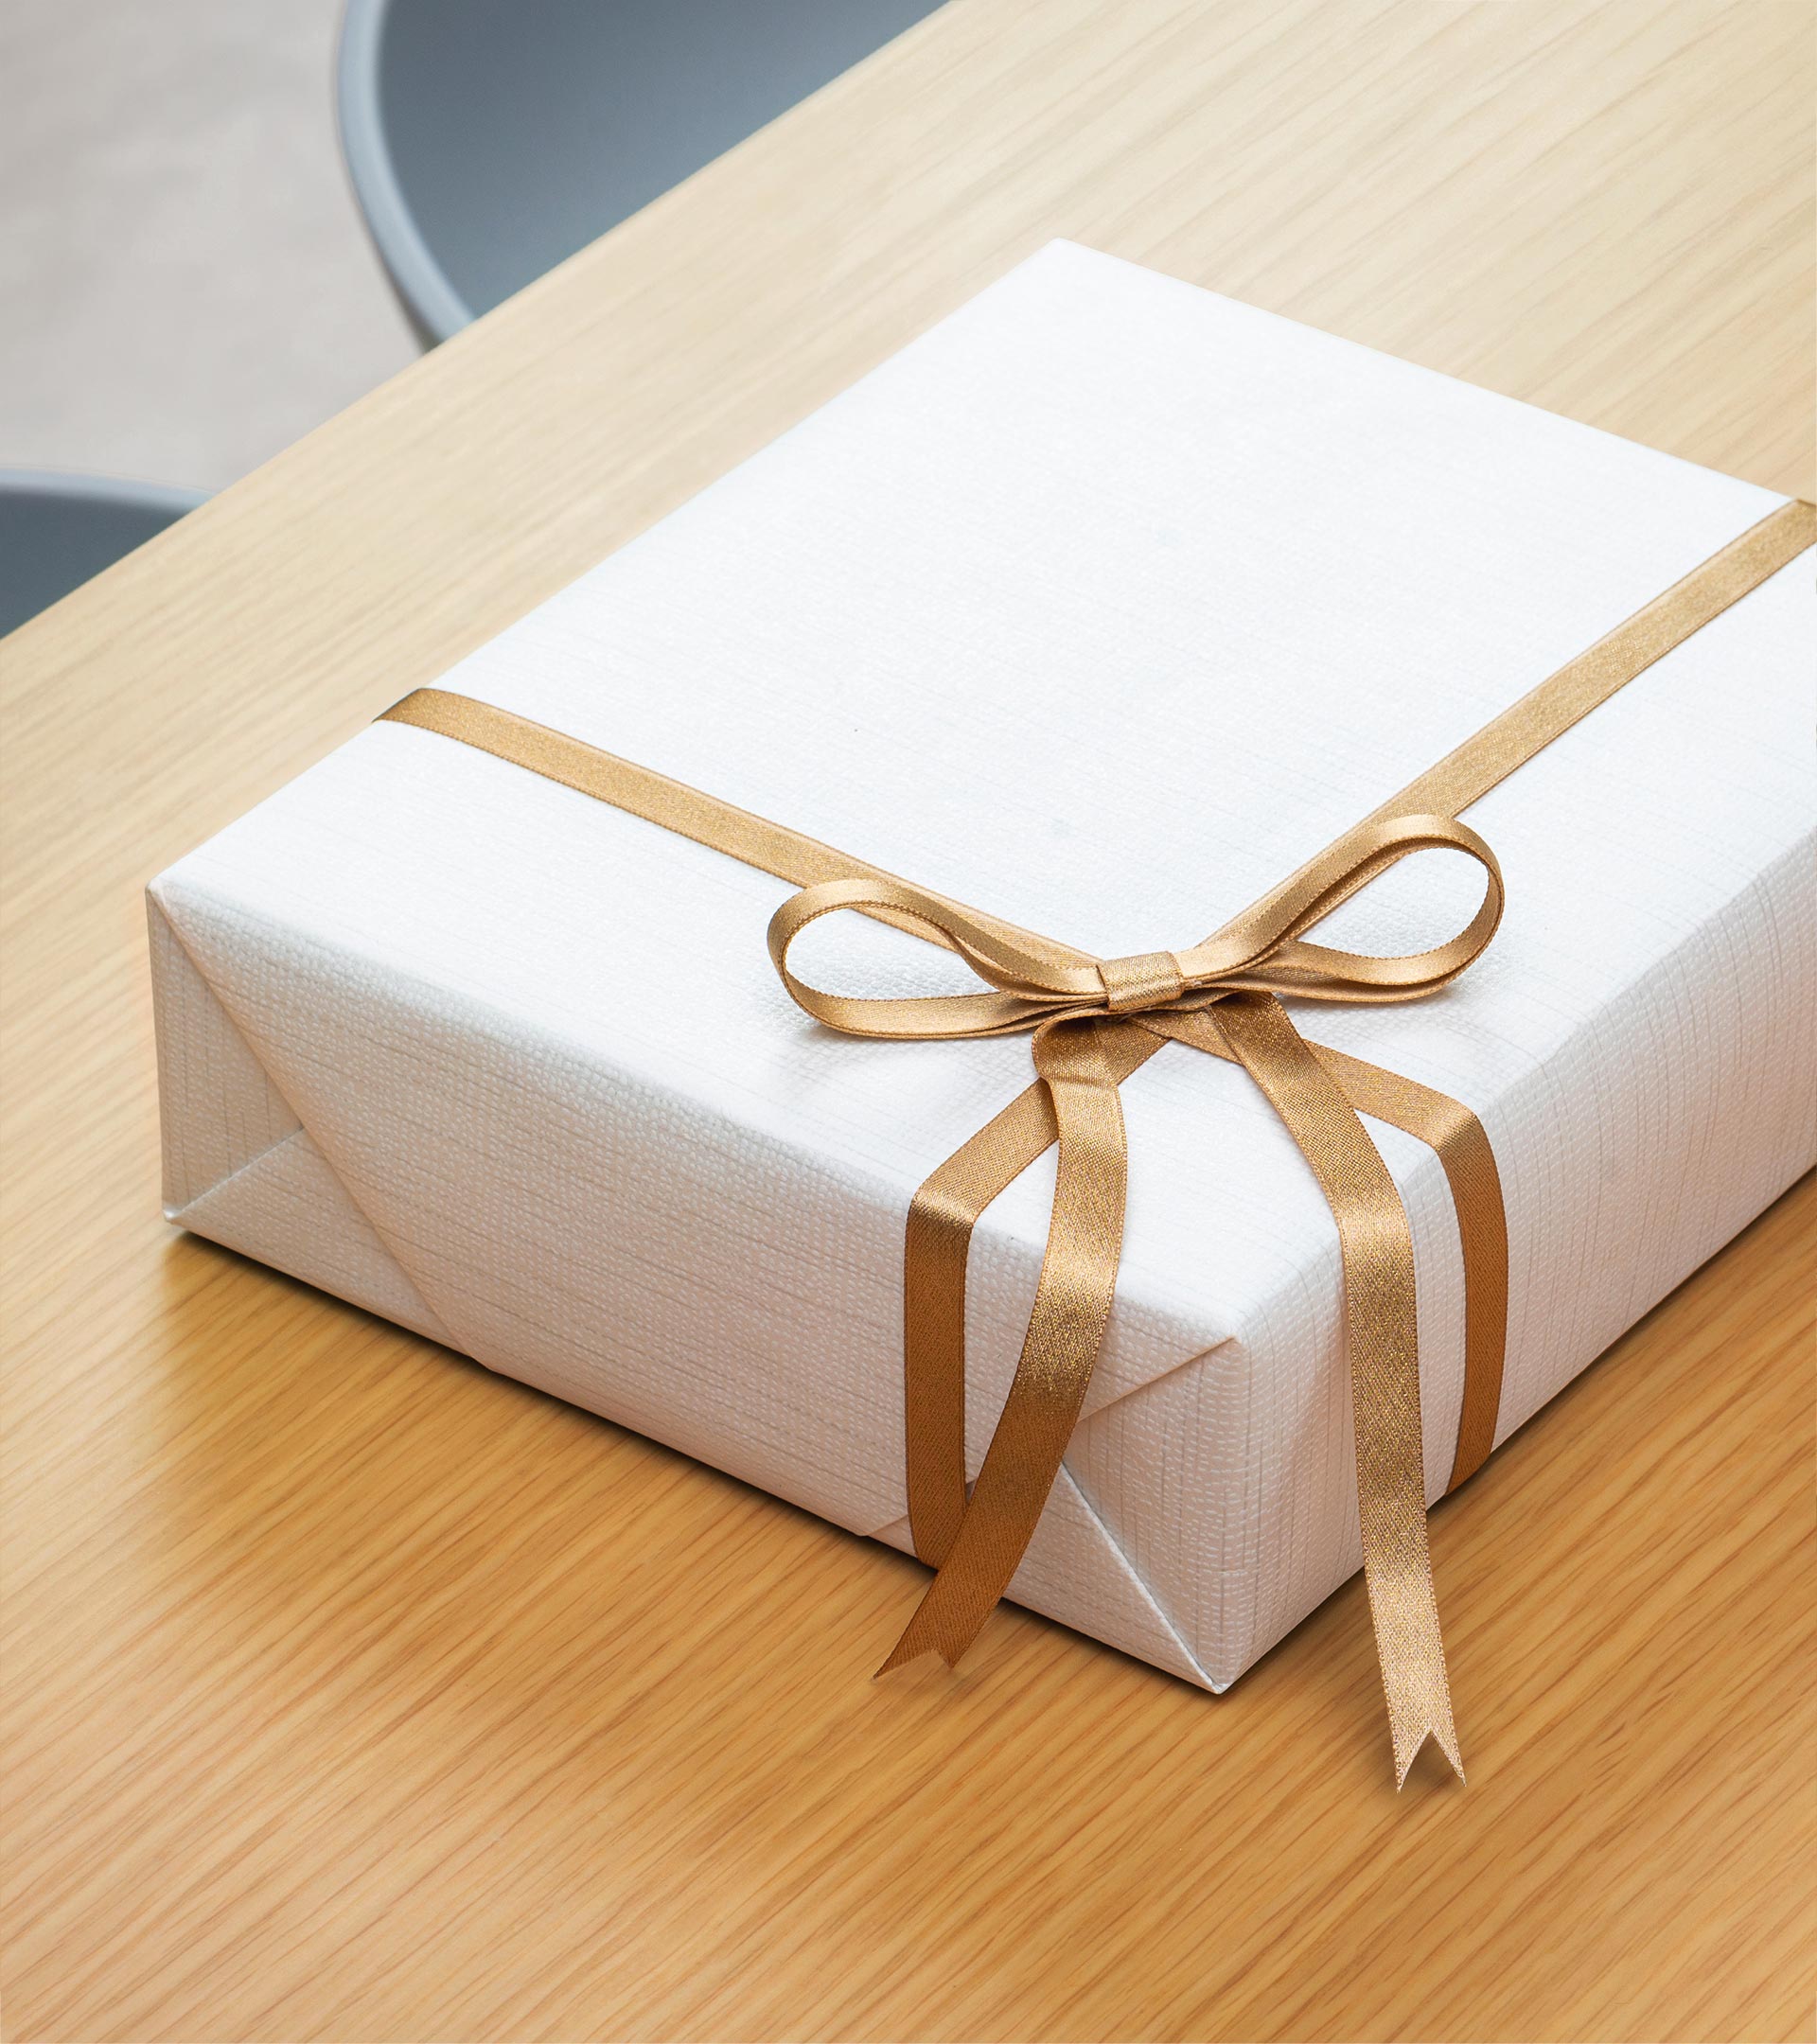 Make it special with dedicate gift wrapping